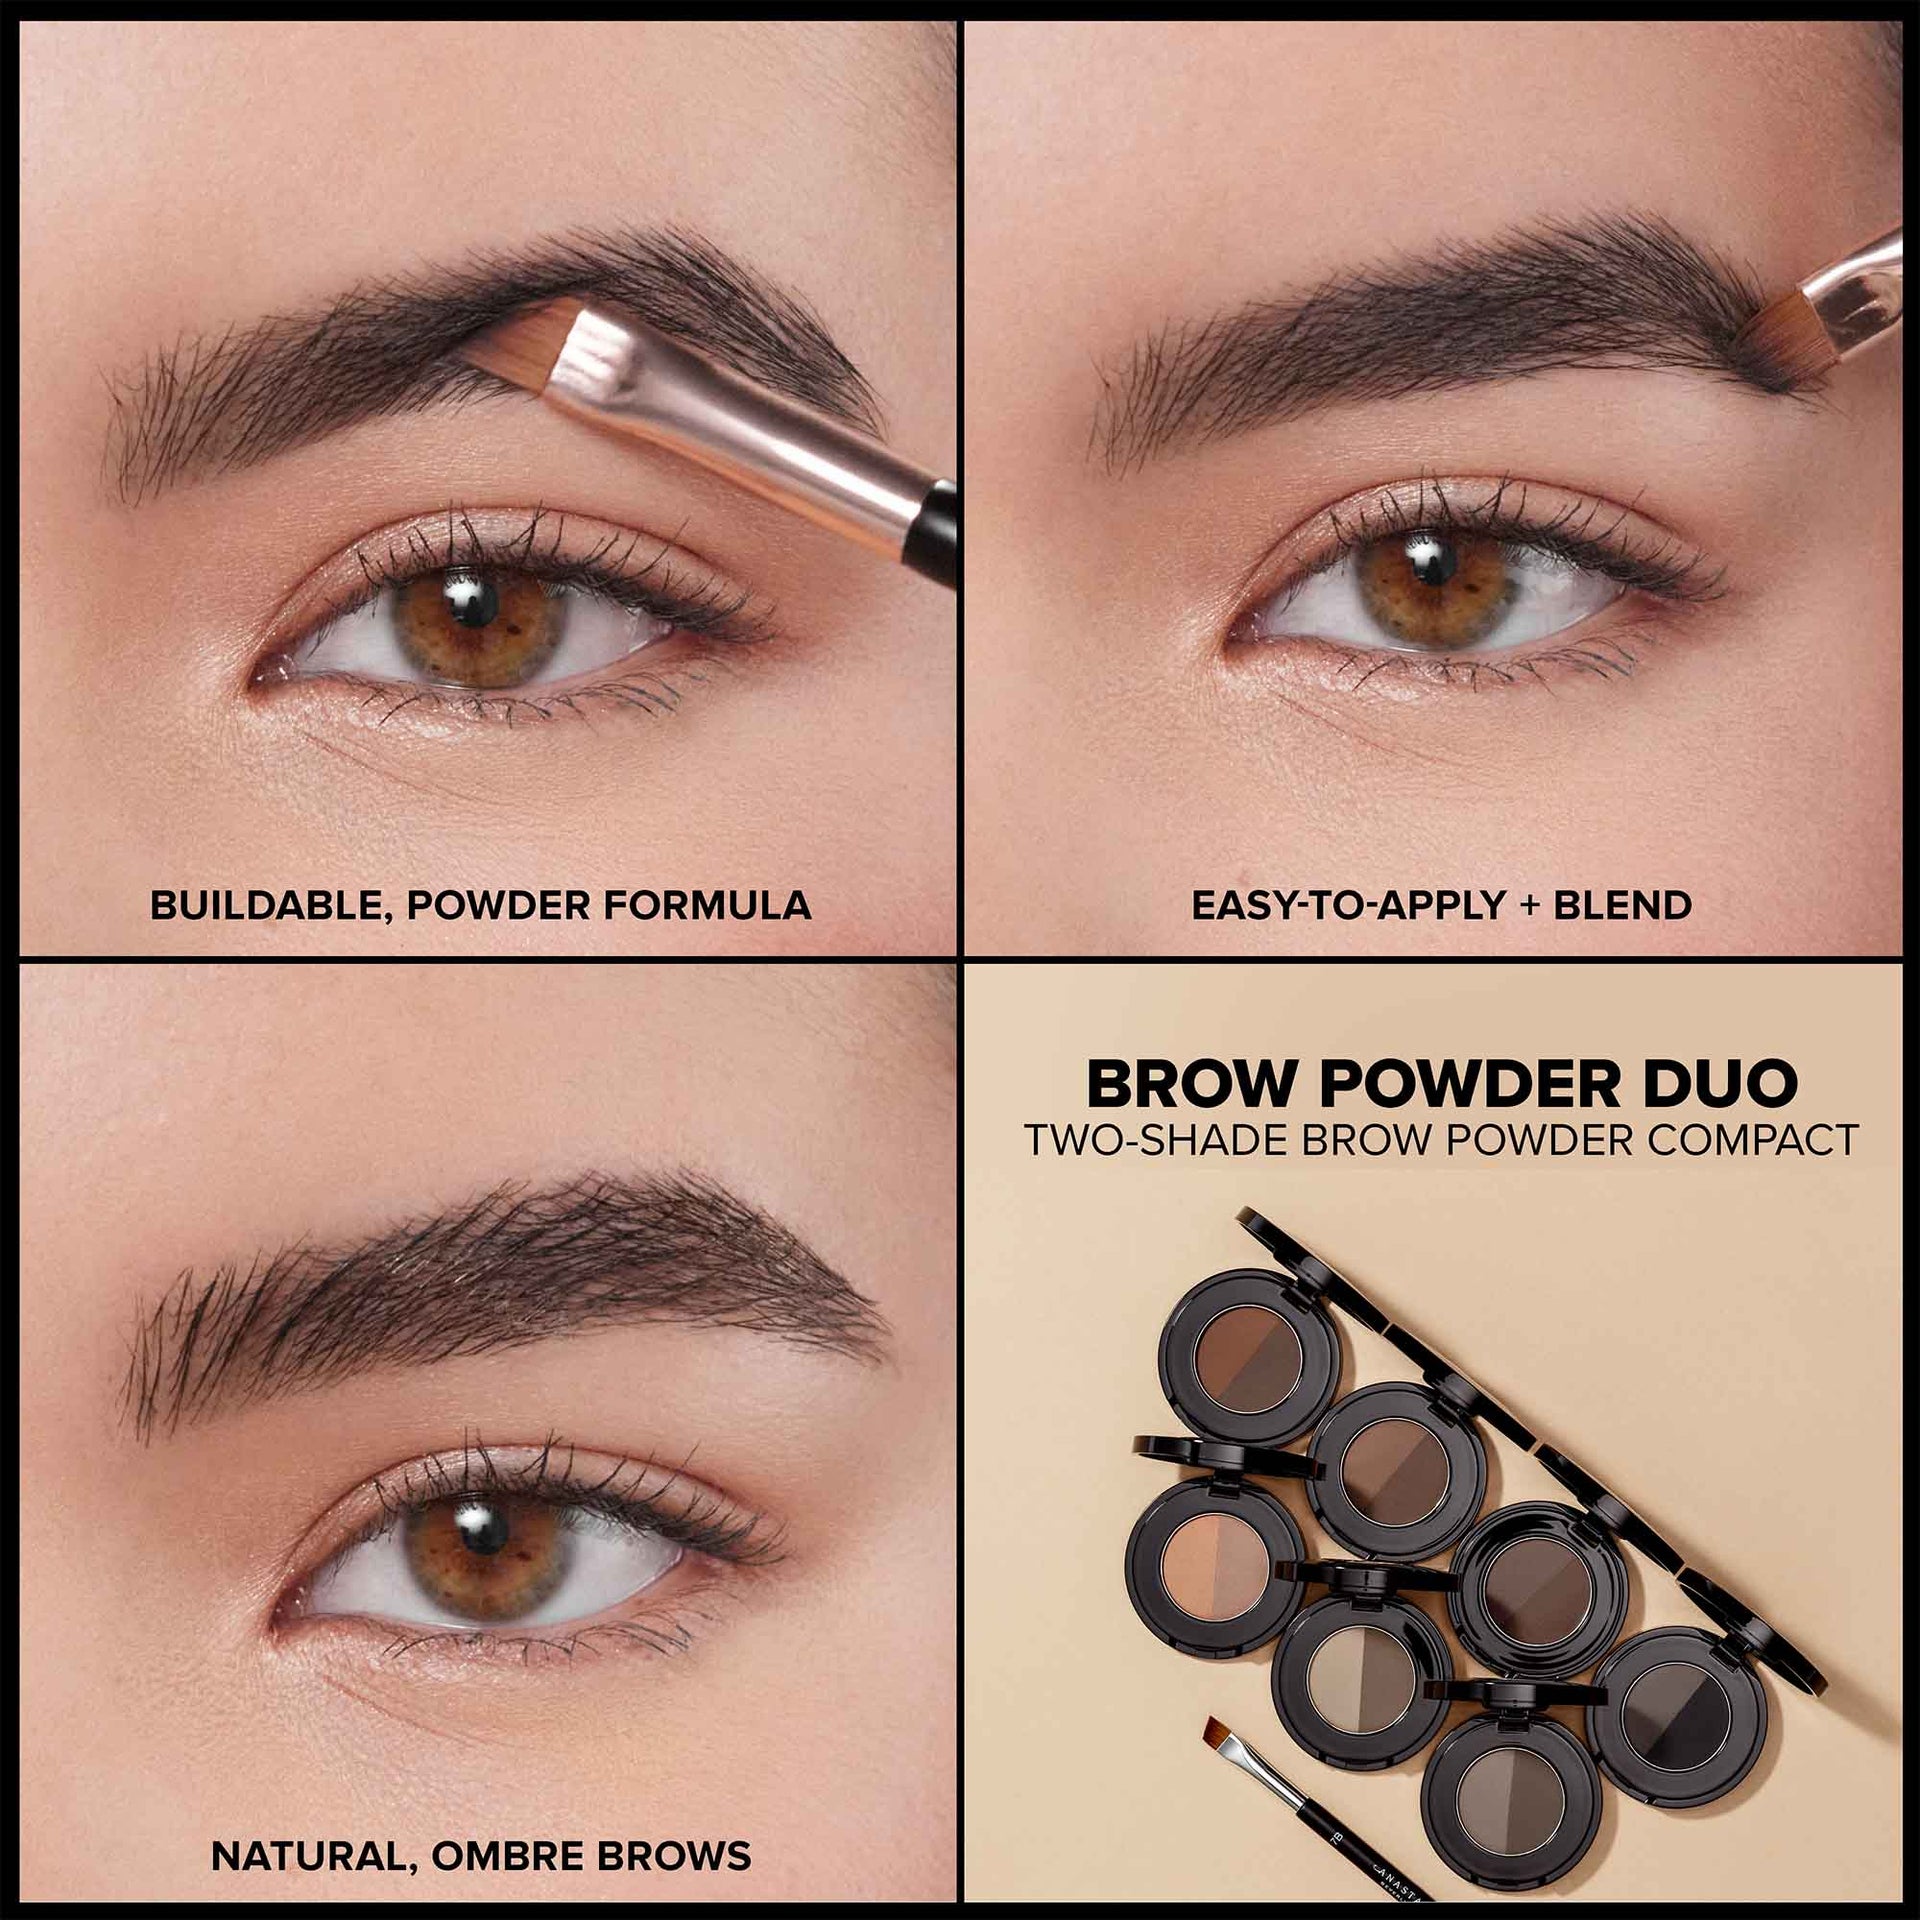 Brow Powder Duo Features